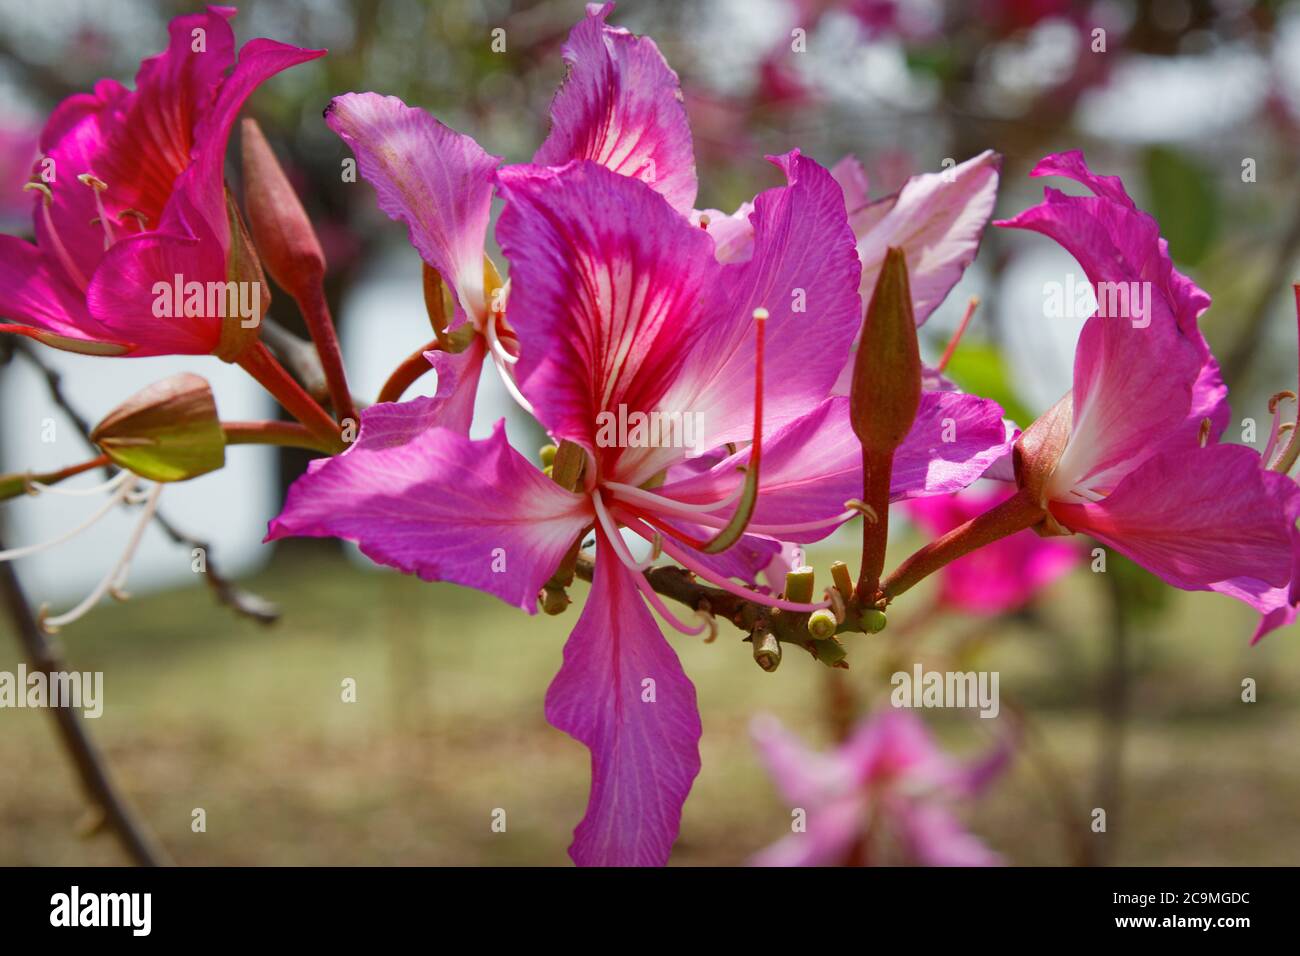 Closeup of pink flower of the Bauhinia Blakeana commonly called the Hong Kong orchid tree Stock Photo